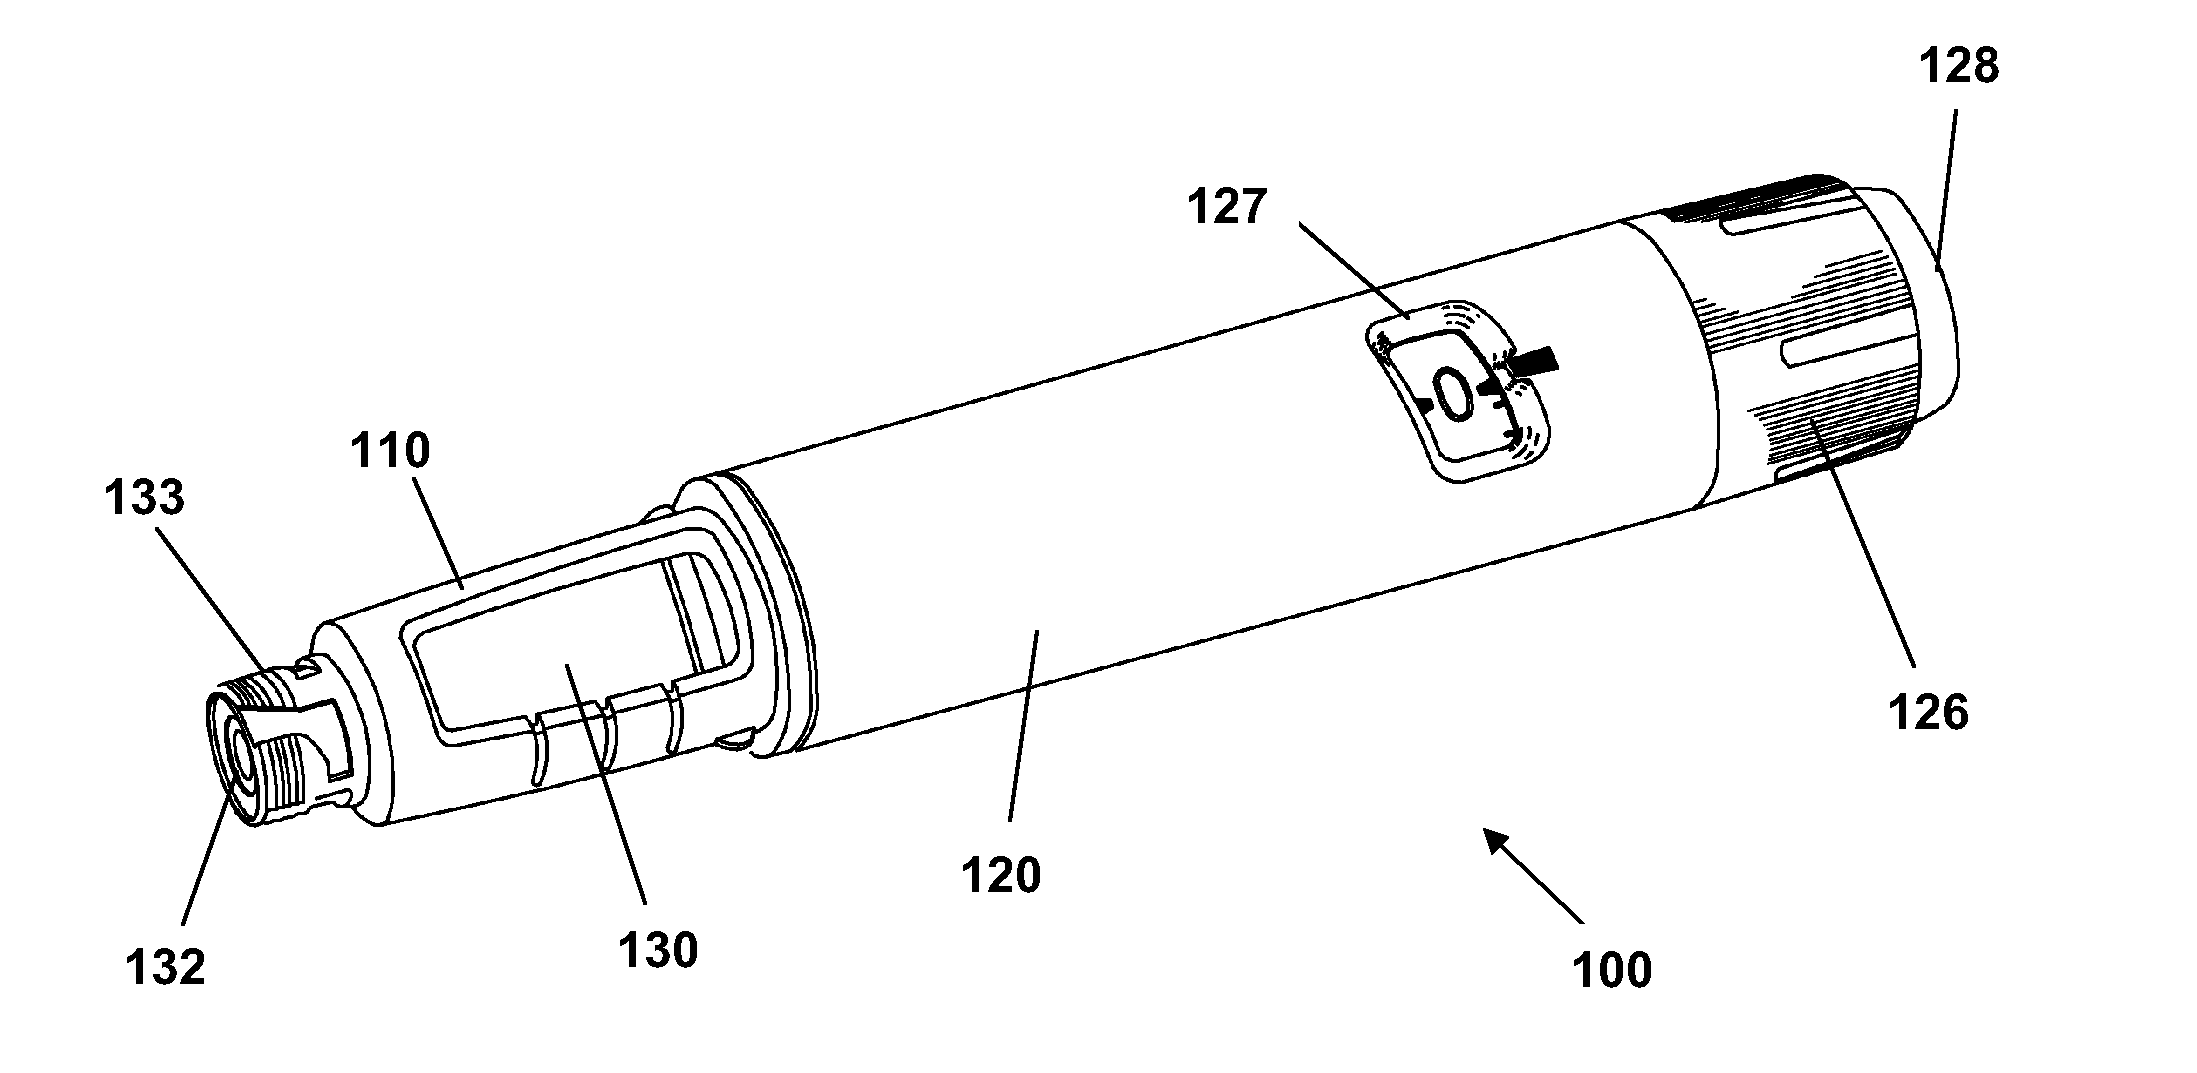 Drug Delivery Device with Cartridge Fixation Feature